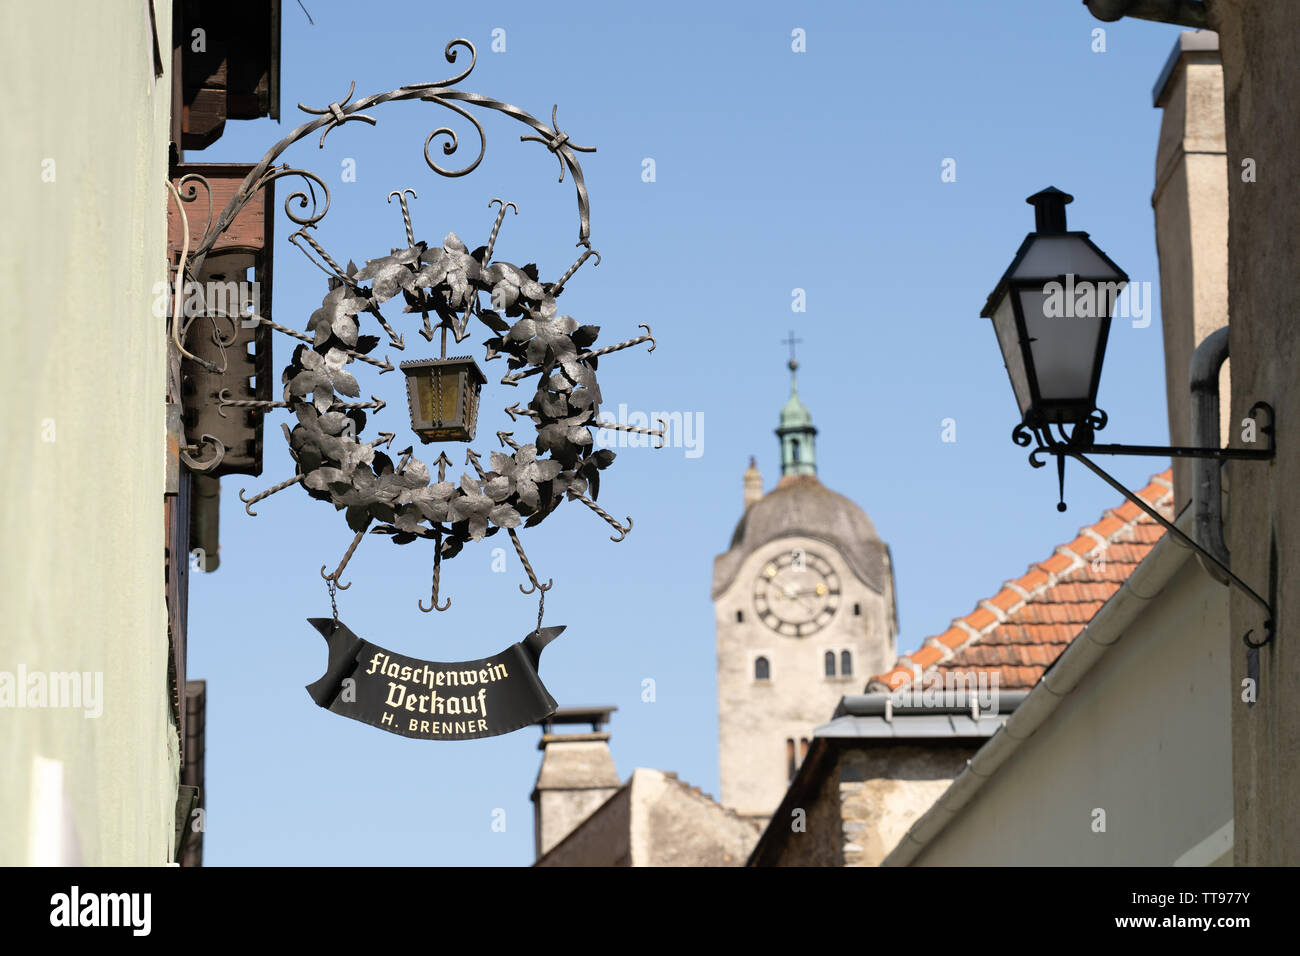 A street sign advertising a vintner in Stein an der Donau, a popular tourist destination, with the gothic Frauebergkirche in the background Stock Photo